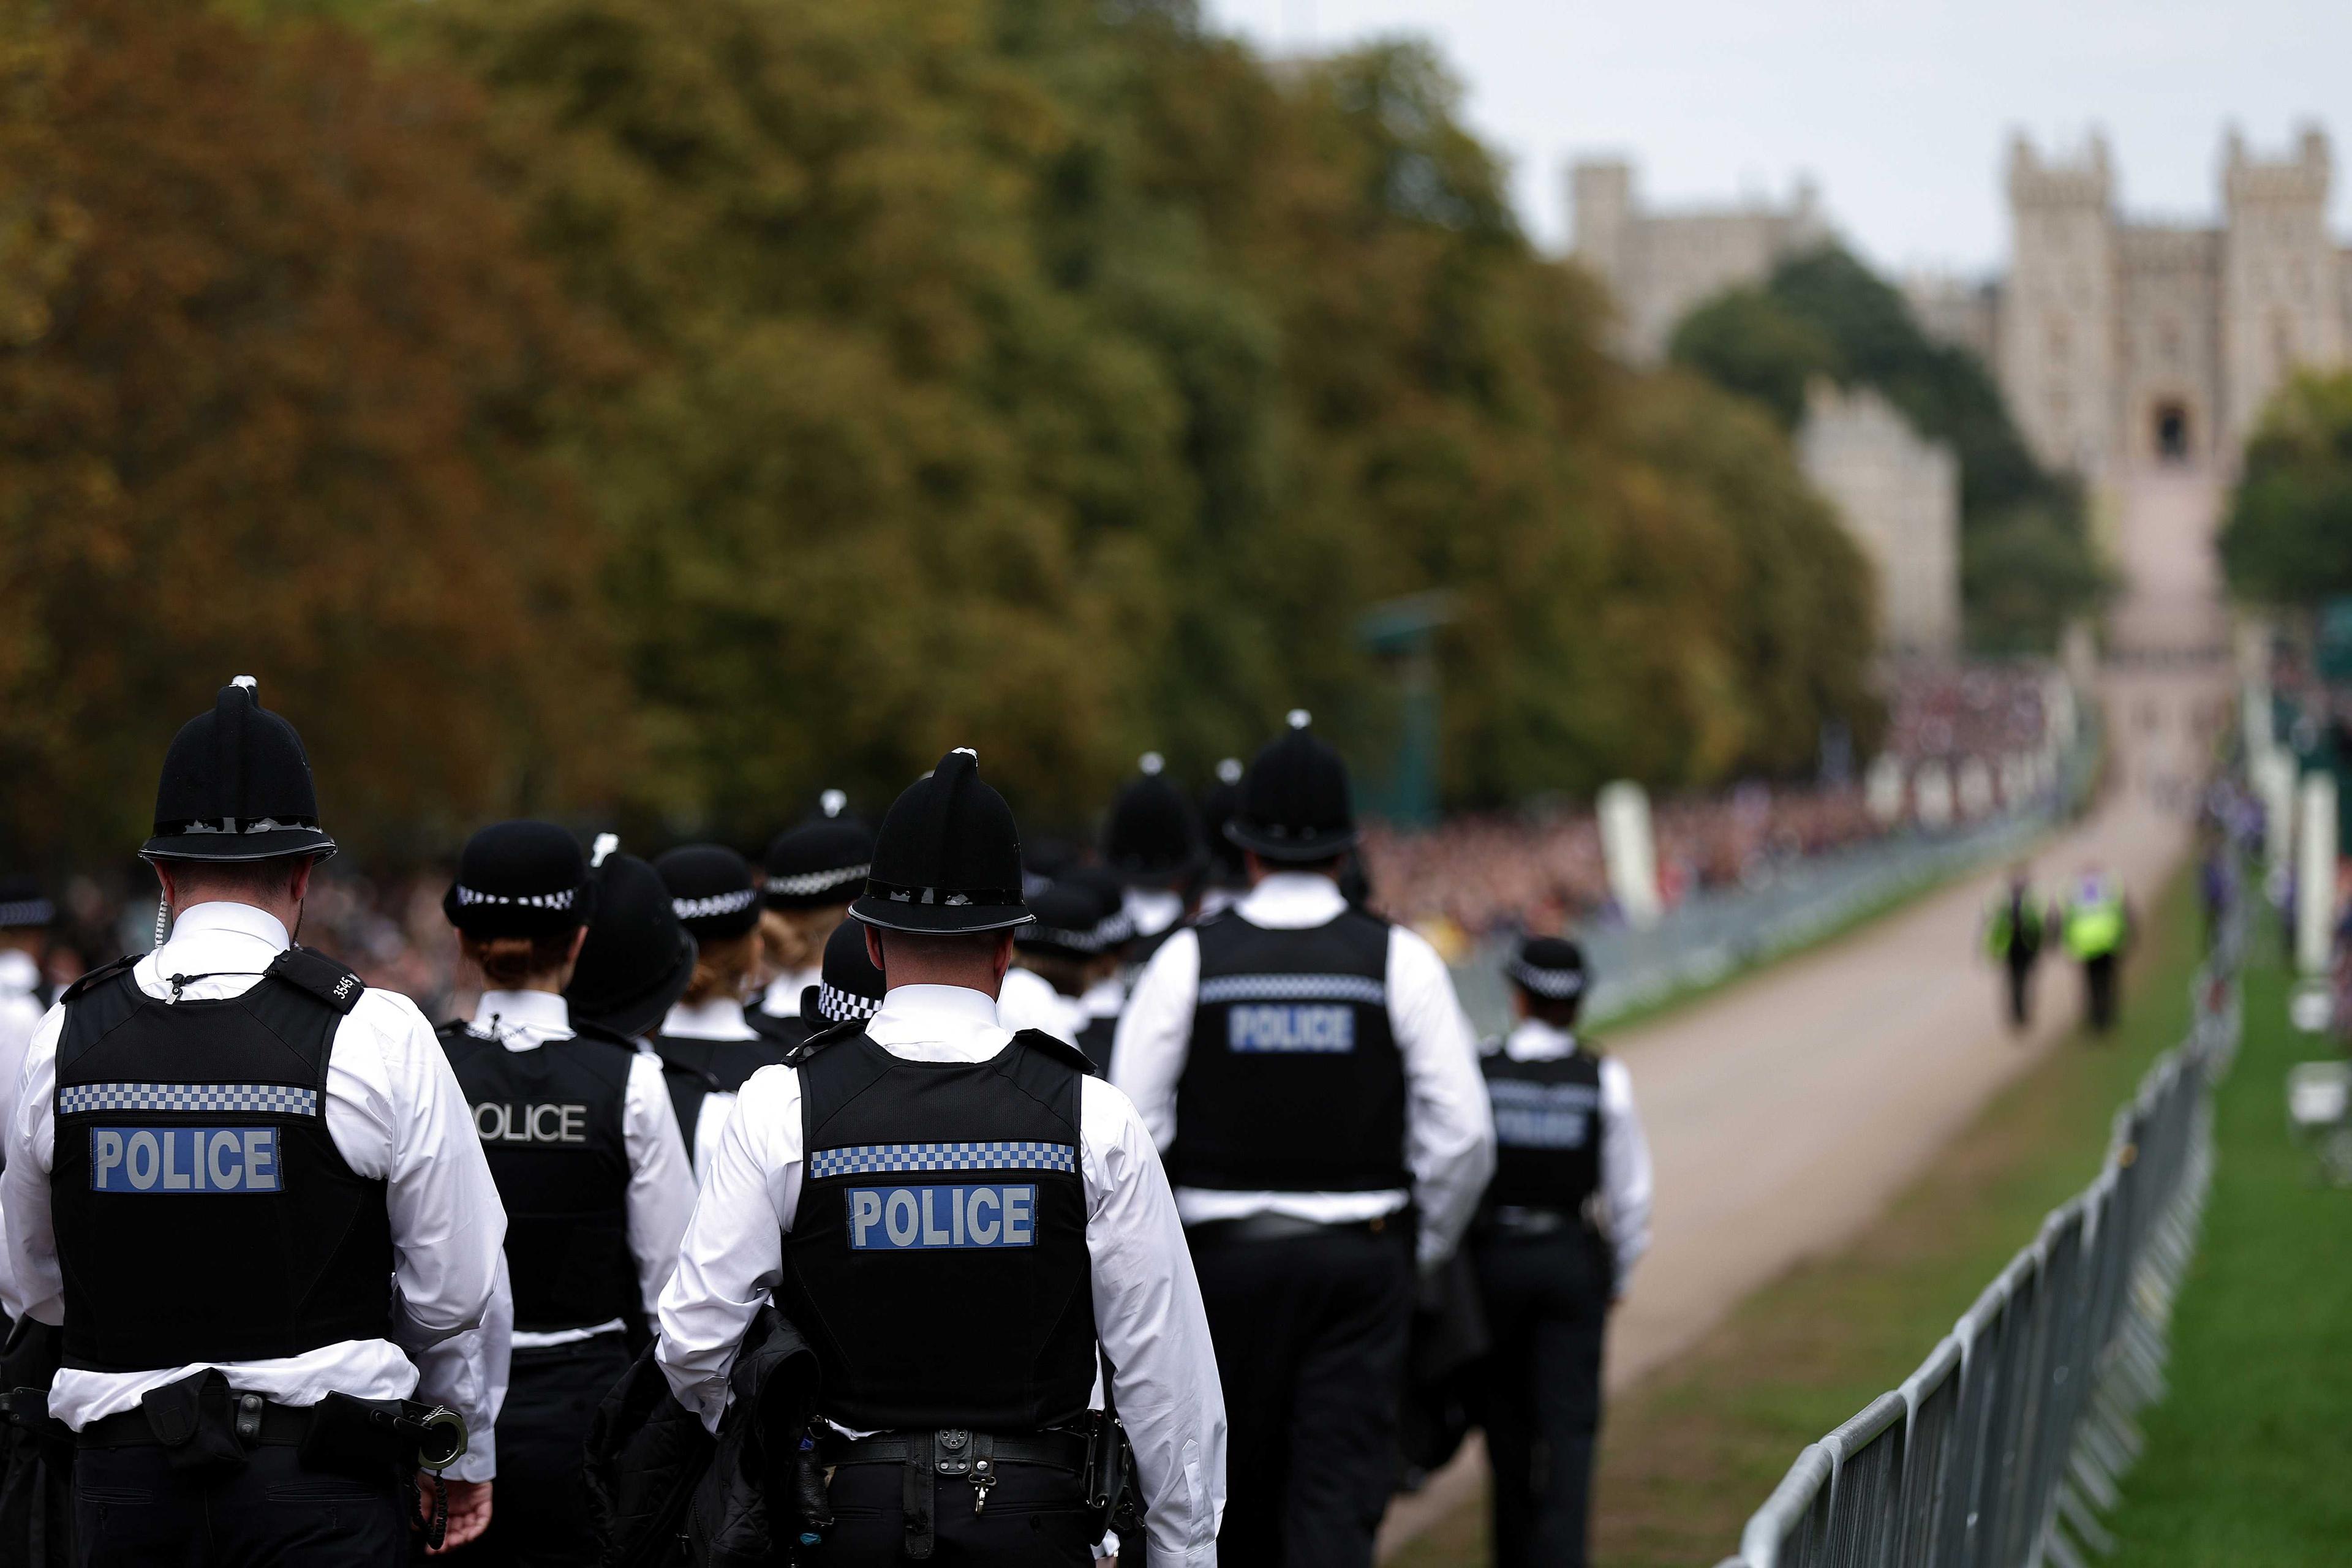 Members of the Police walk on Sept 19, 2022 in Windsor, England. Photo: Reuters 